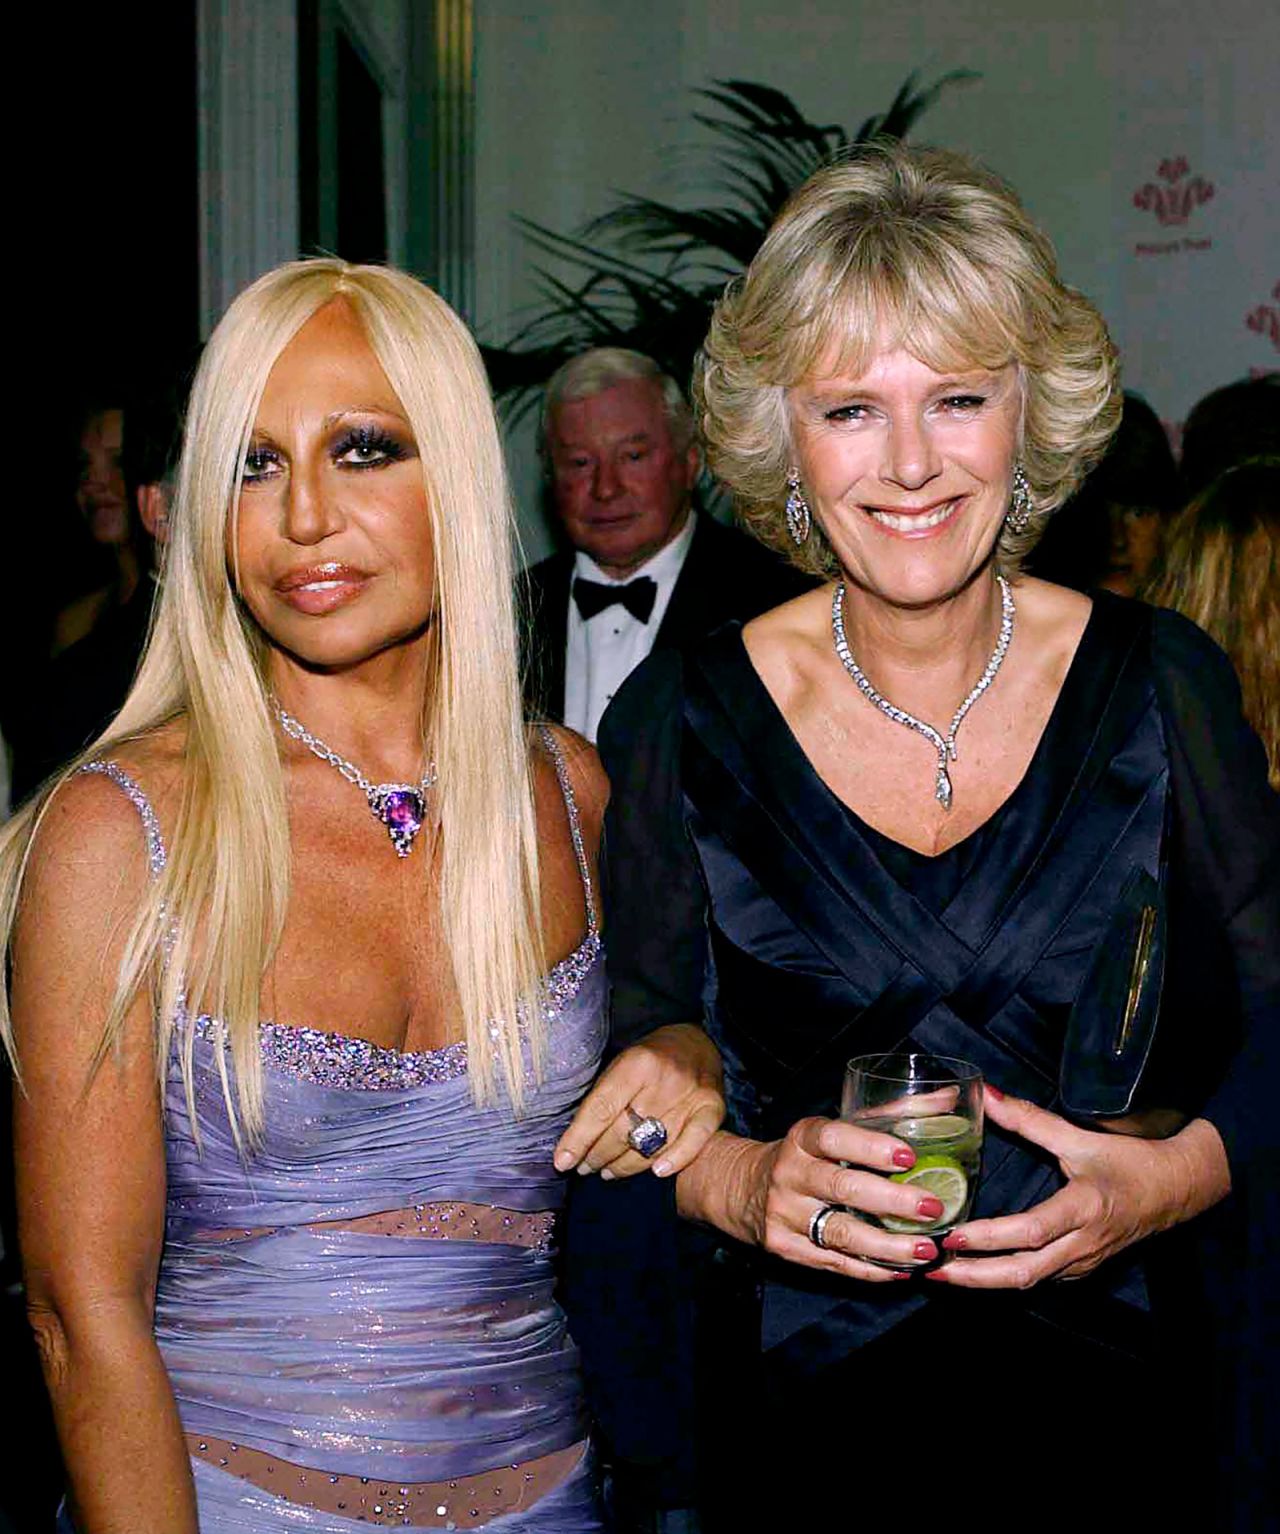 In 2003, while attending yet another fashion event (this time, the Prince's Trust "Fashion Rocks" concert at Royal Albert Hall) Camilla is photographed meeting industry legend Dontella Versace. She wore her trusty diamond serpentine necklace once again.